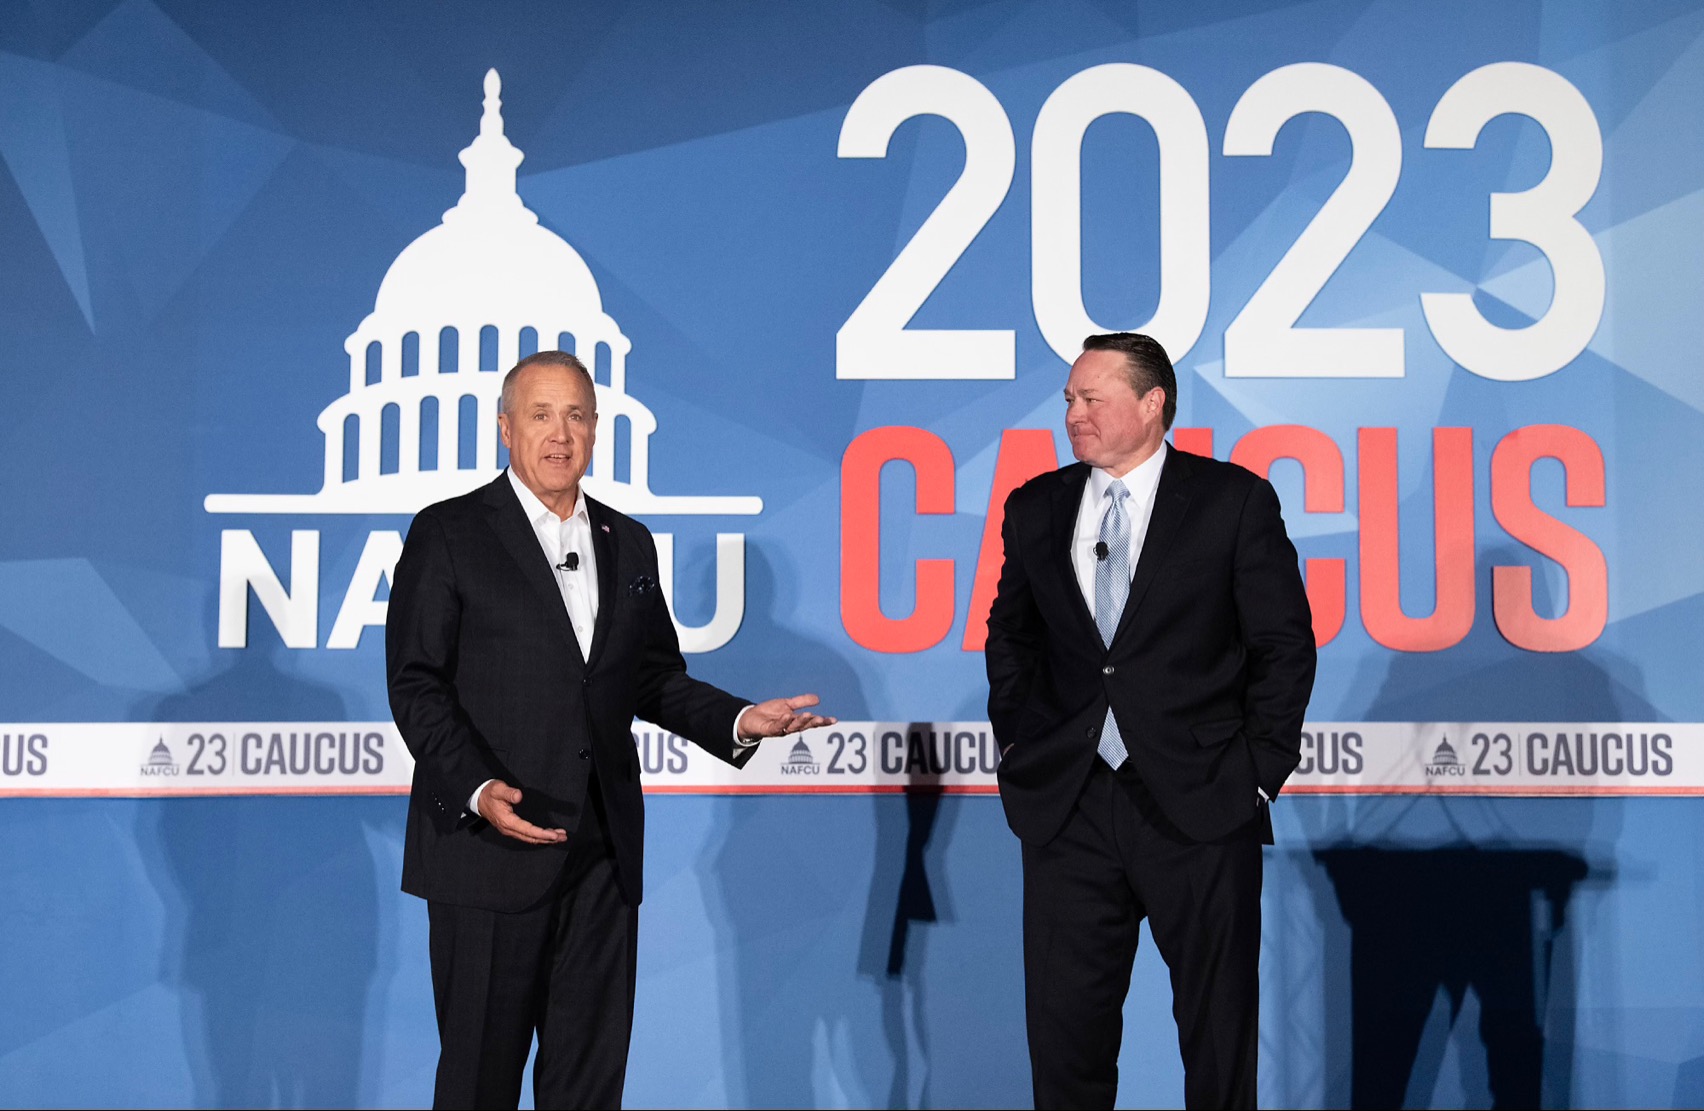 Jim Nussle (left) and Dan Berger share insights into the proposed transformation to America's Credit Unions at Congressional Caucus Monday. (Photo by Greg Dohler)